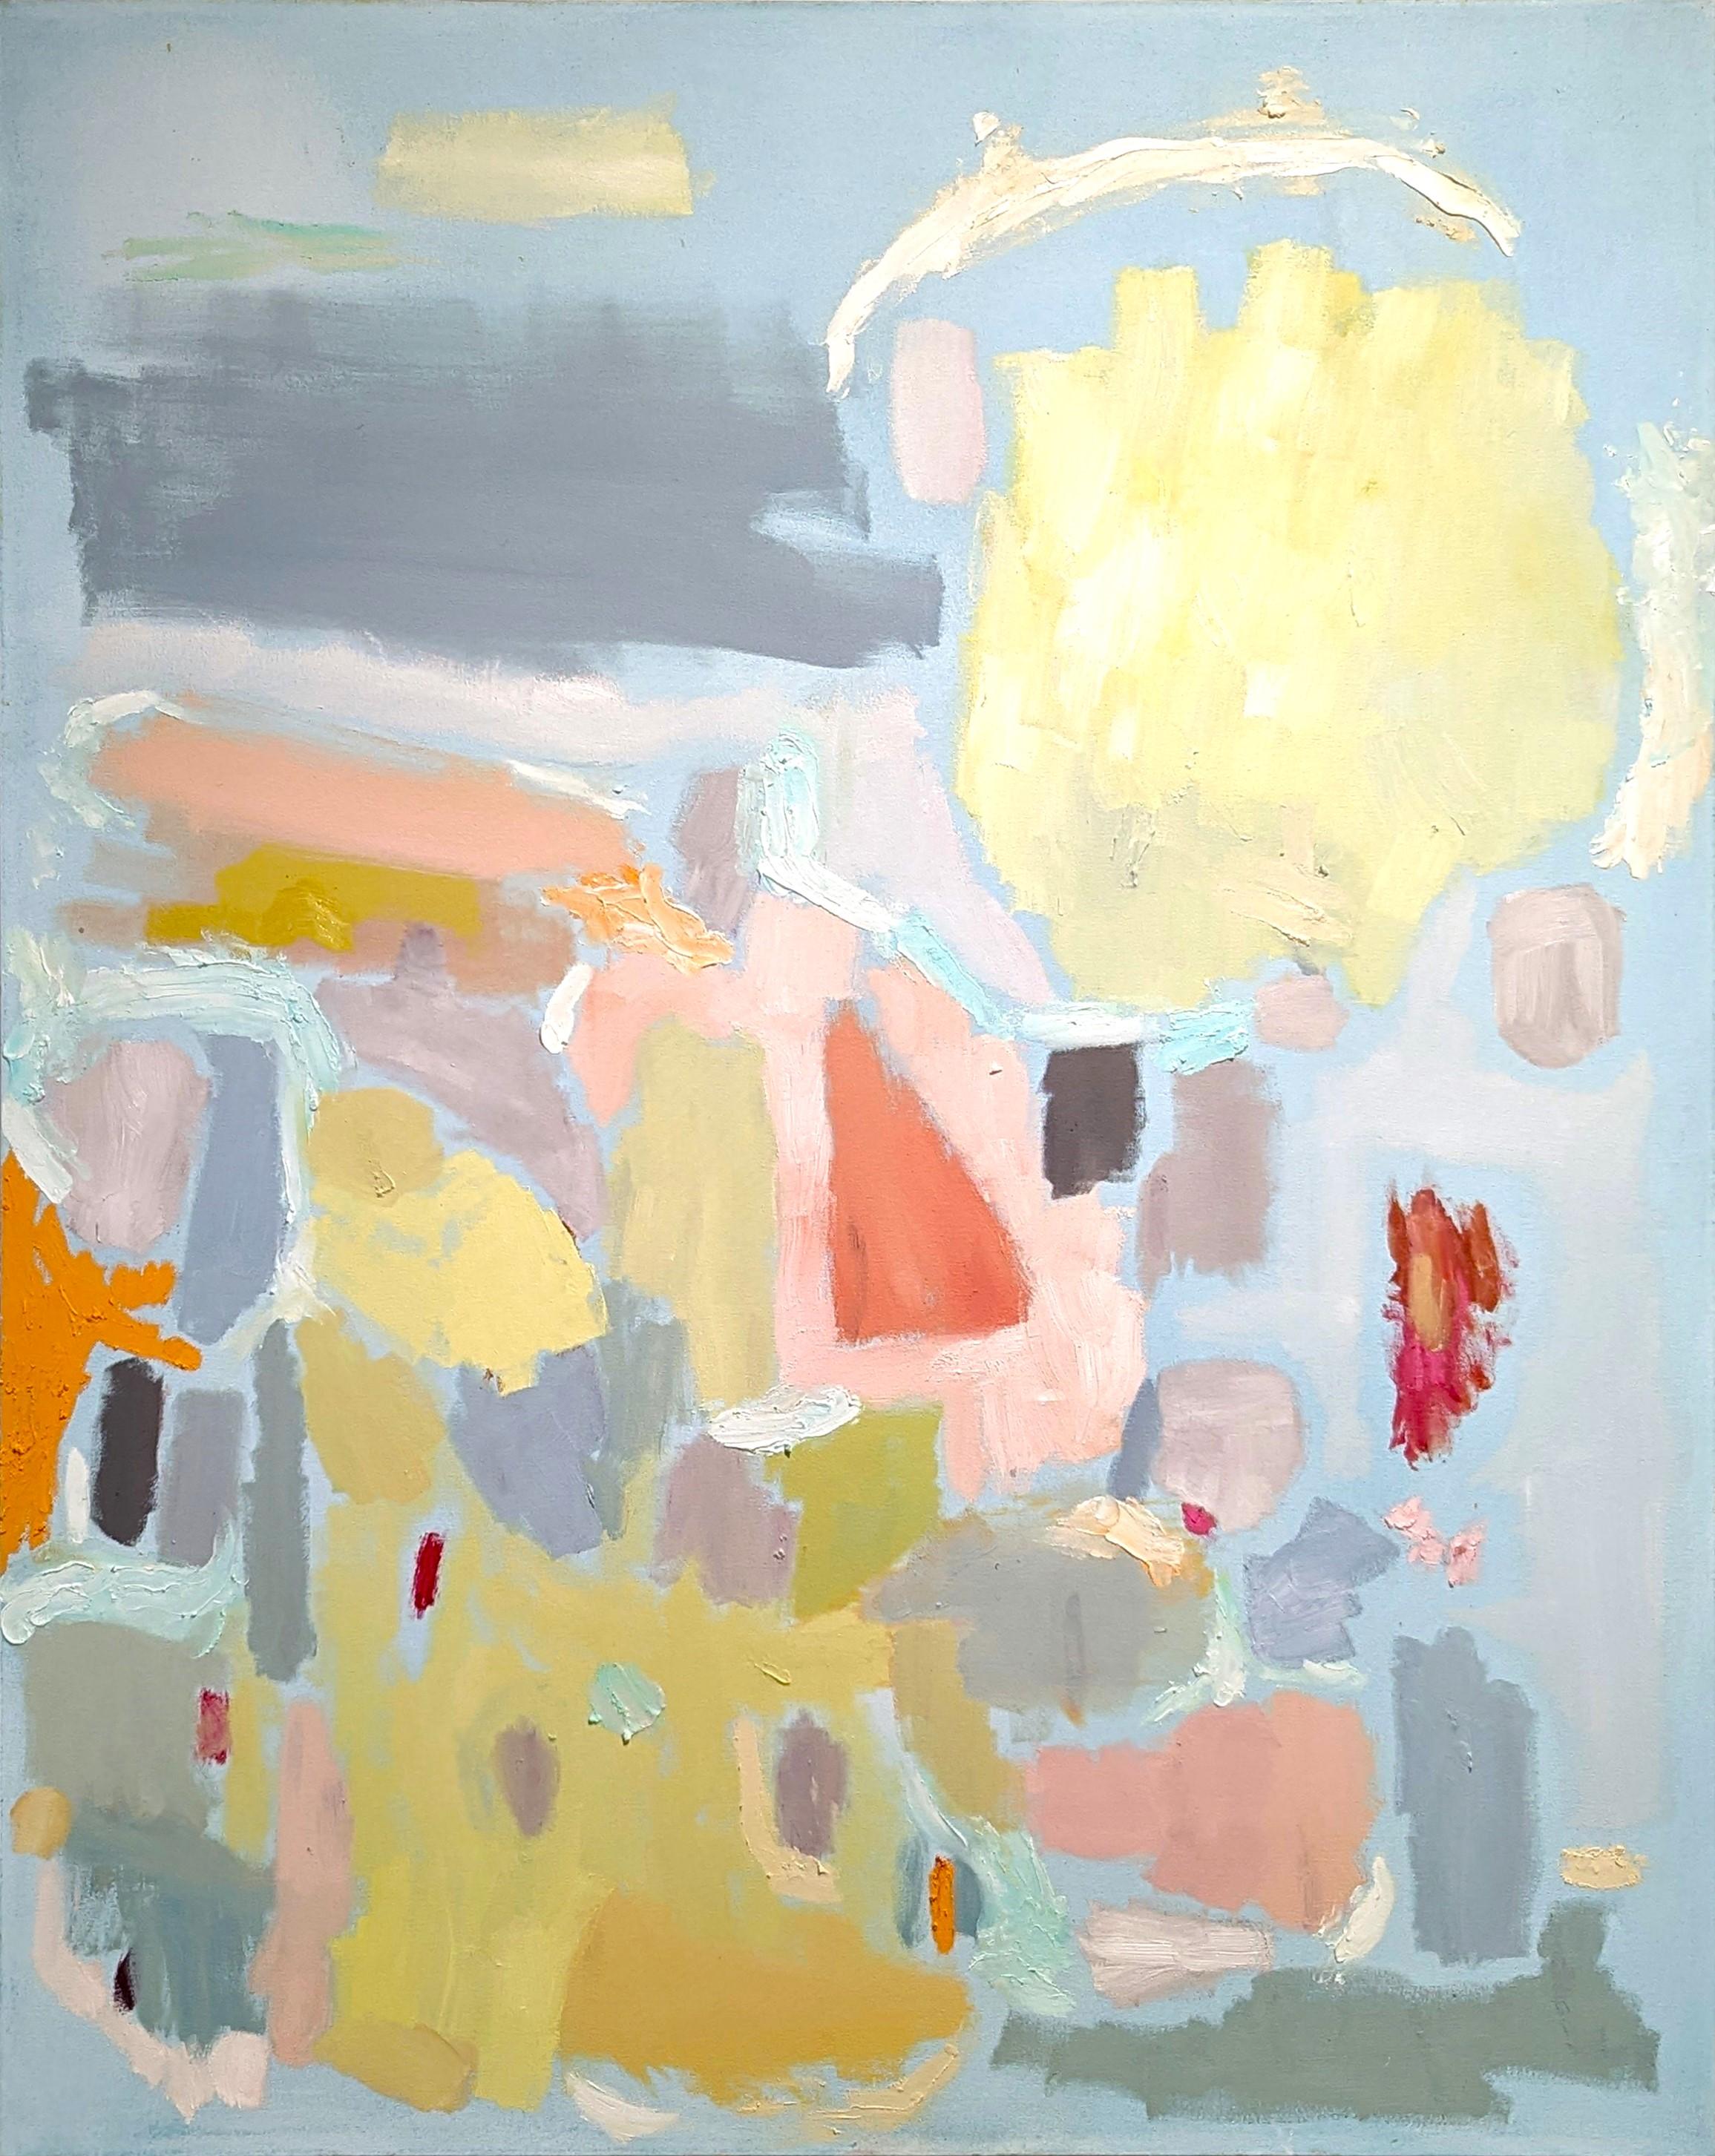 "Cake Bake Birthday Hat" Contemporary Pastel Expressionist Abstract Painting - Art by Benji Stiles